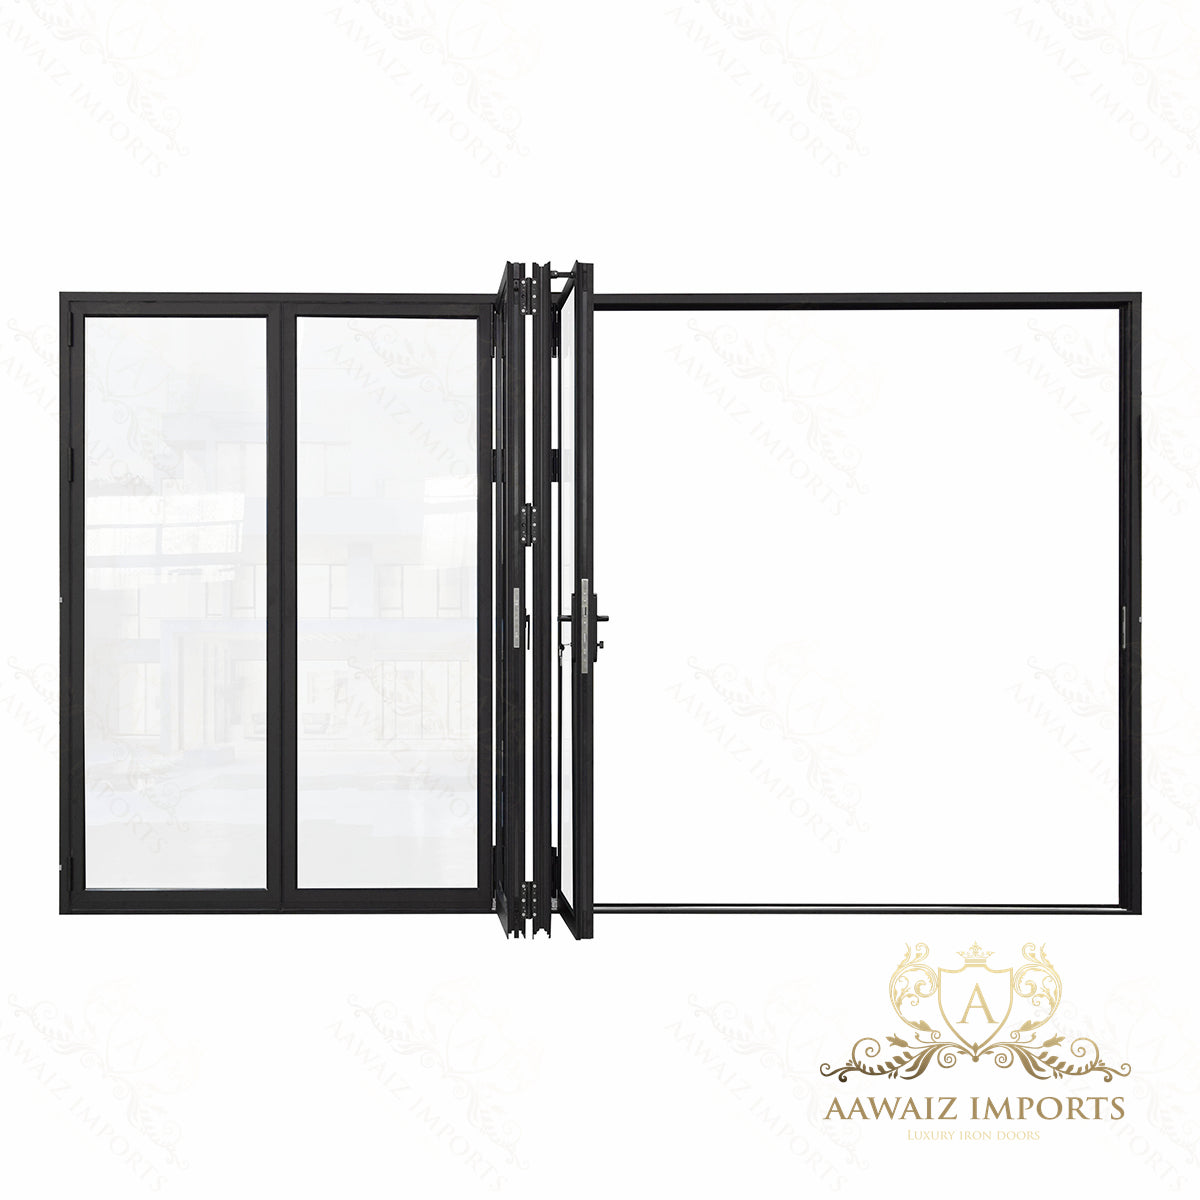 14 Ft Wide By 9 Ft Tall (168" By 108") Aluminum Bi Fold Patio Door  Outswing  Thermal Break Insulated Matt Black Finish